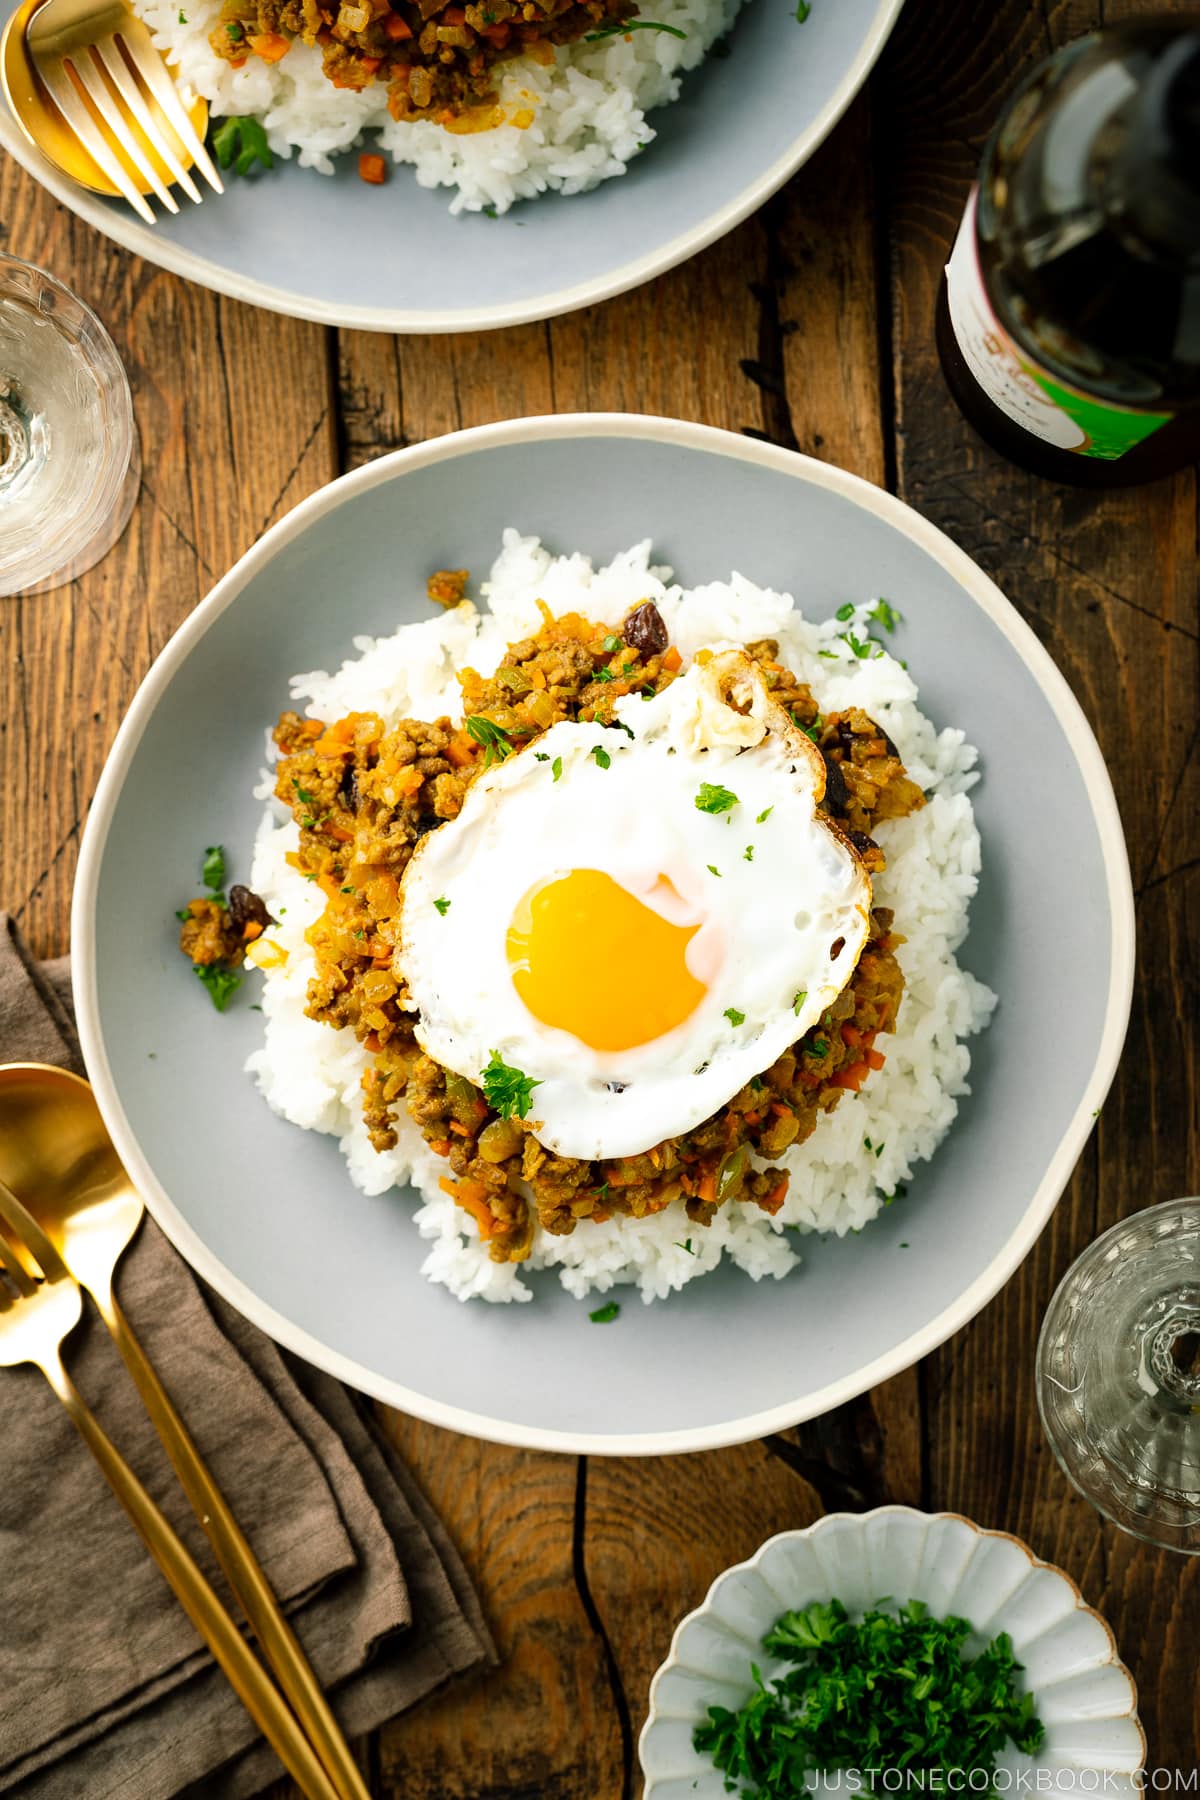 A ceramic plate containing steamed rice, dry curry, and a fried egg.